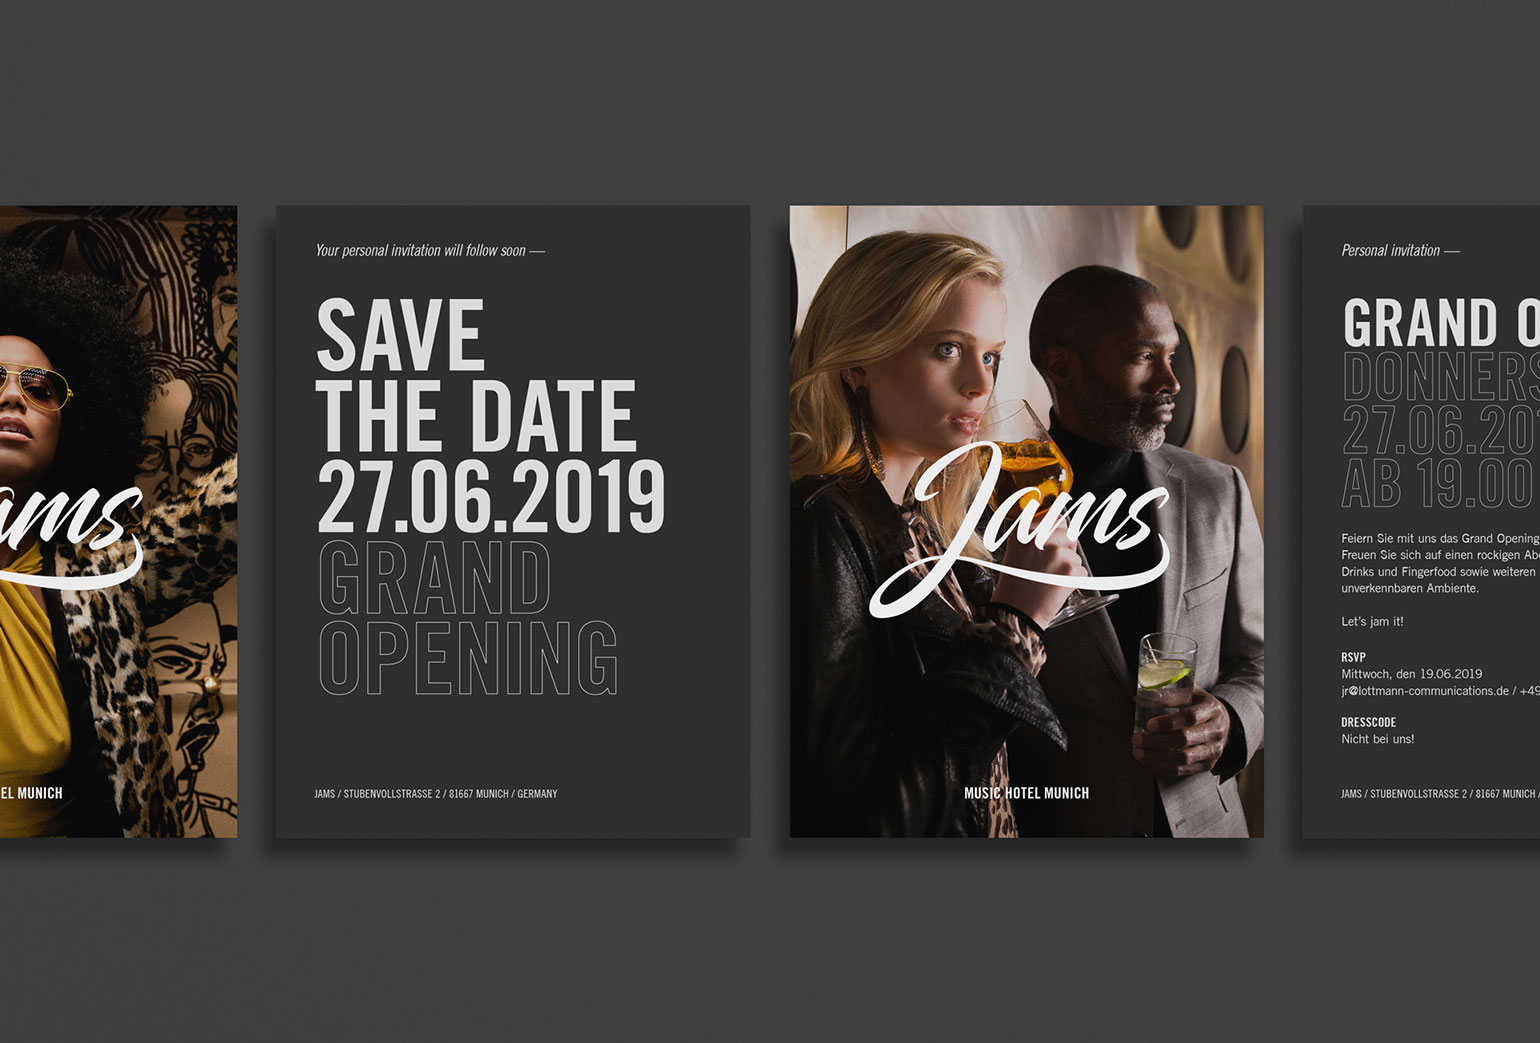 Jams music hotel save the date